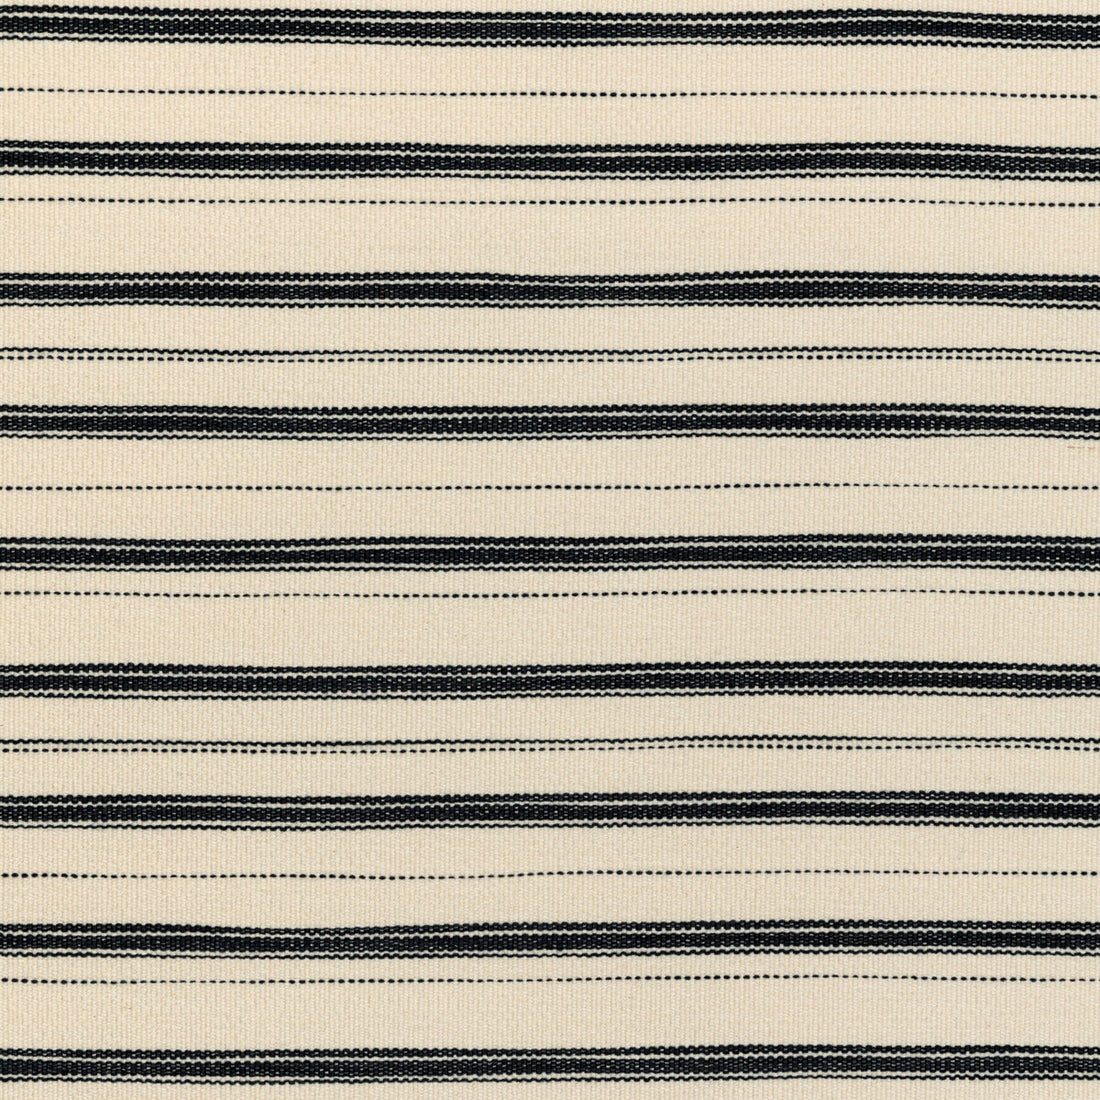 Meeker Stripe fabric in black color - pattern 2020209.81.0 - by Lee Jofa in the Breckenridge collection